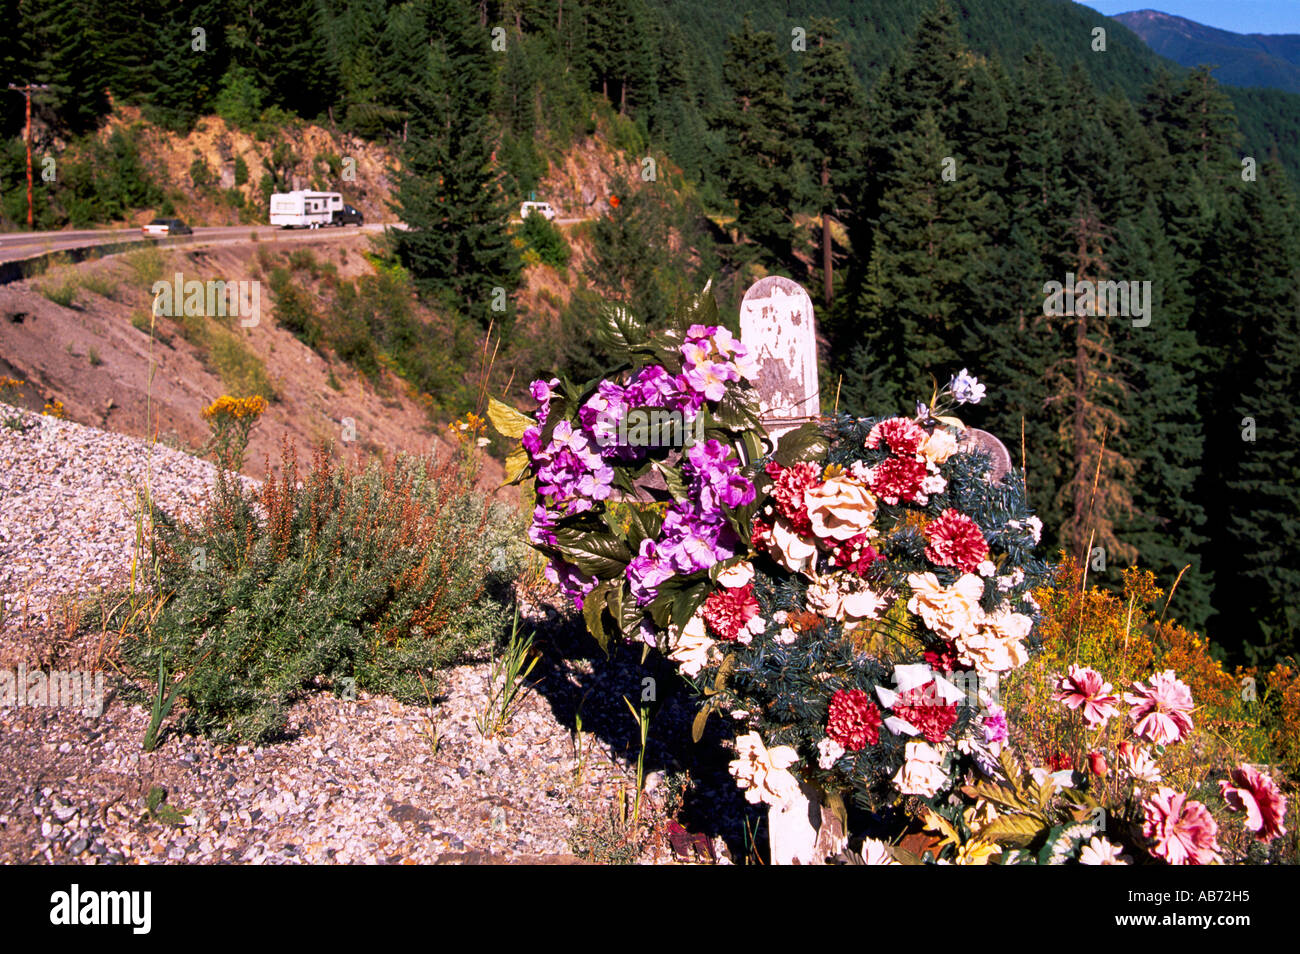 Roadside Memorial Shrine of Flowers for Victim killed in Fatal Car Accident, Manning Provincial Park, British Columbia, Canada Stock Photo